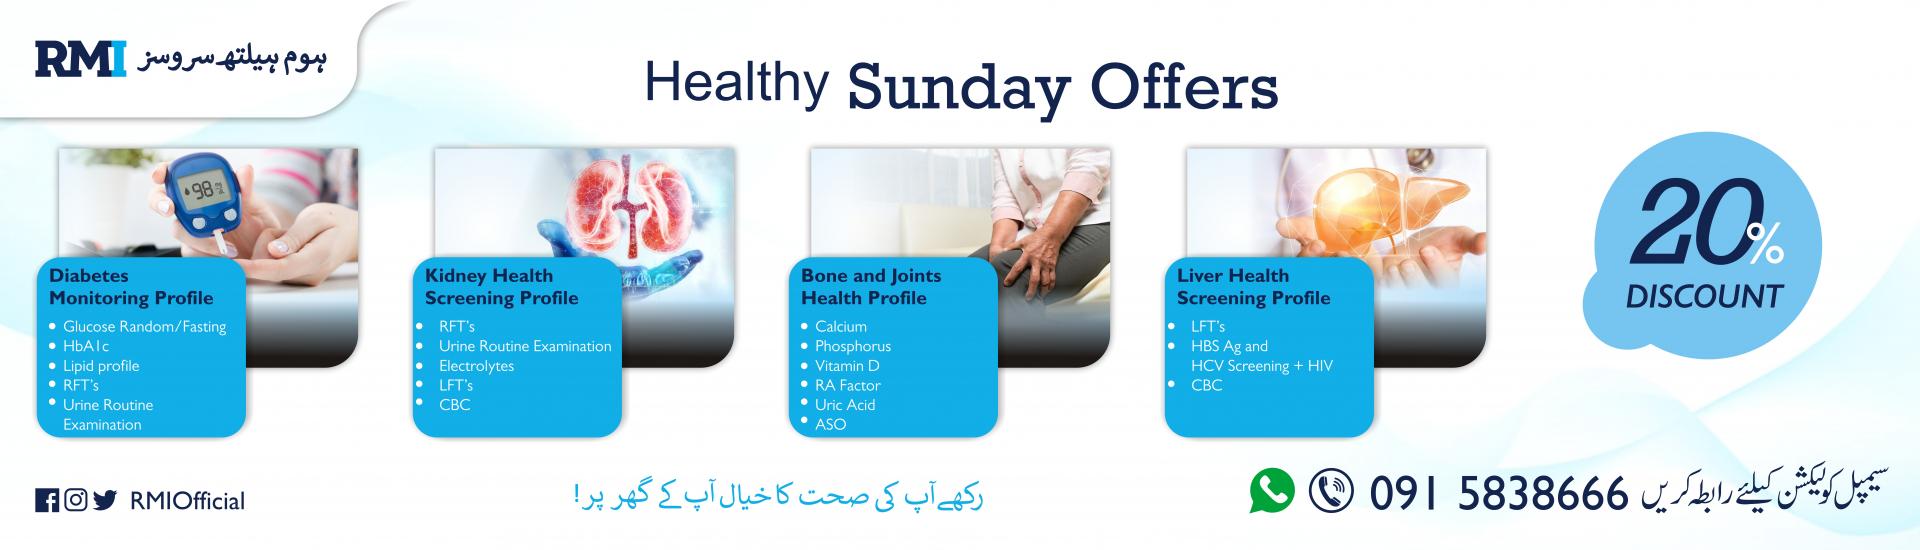 Home health services Sunday offer